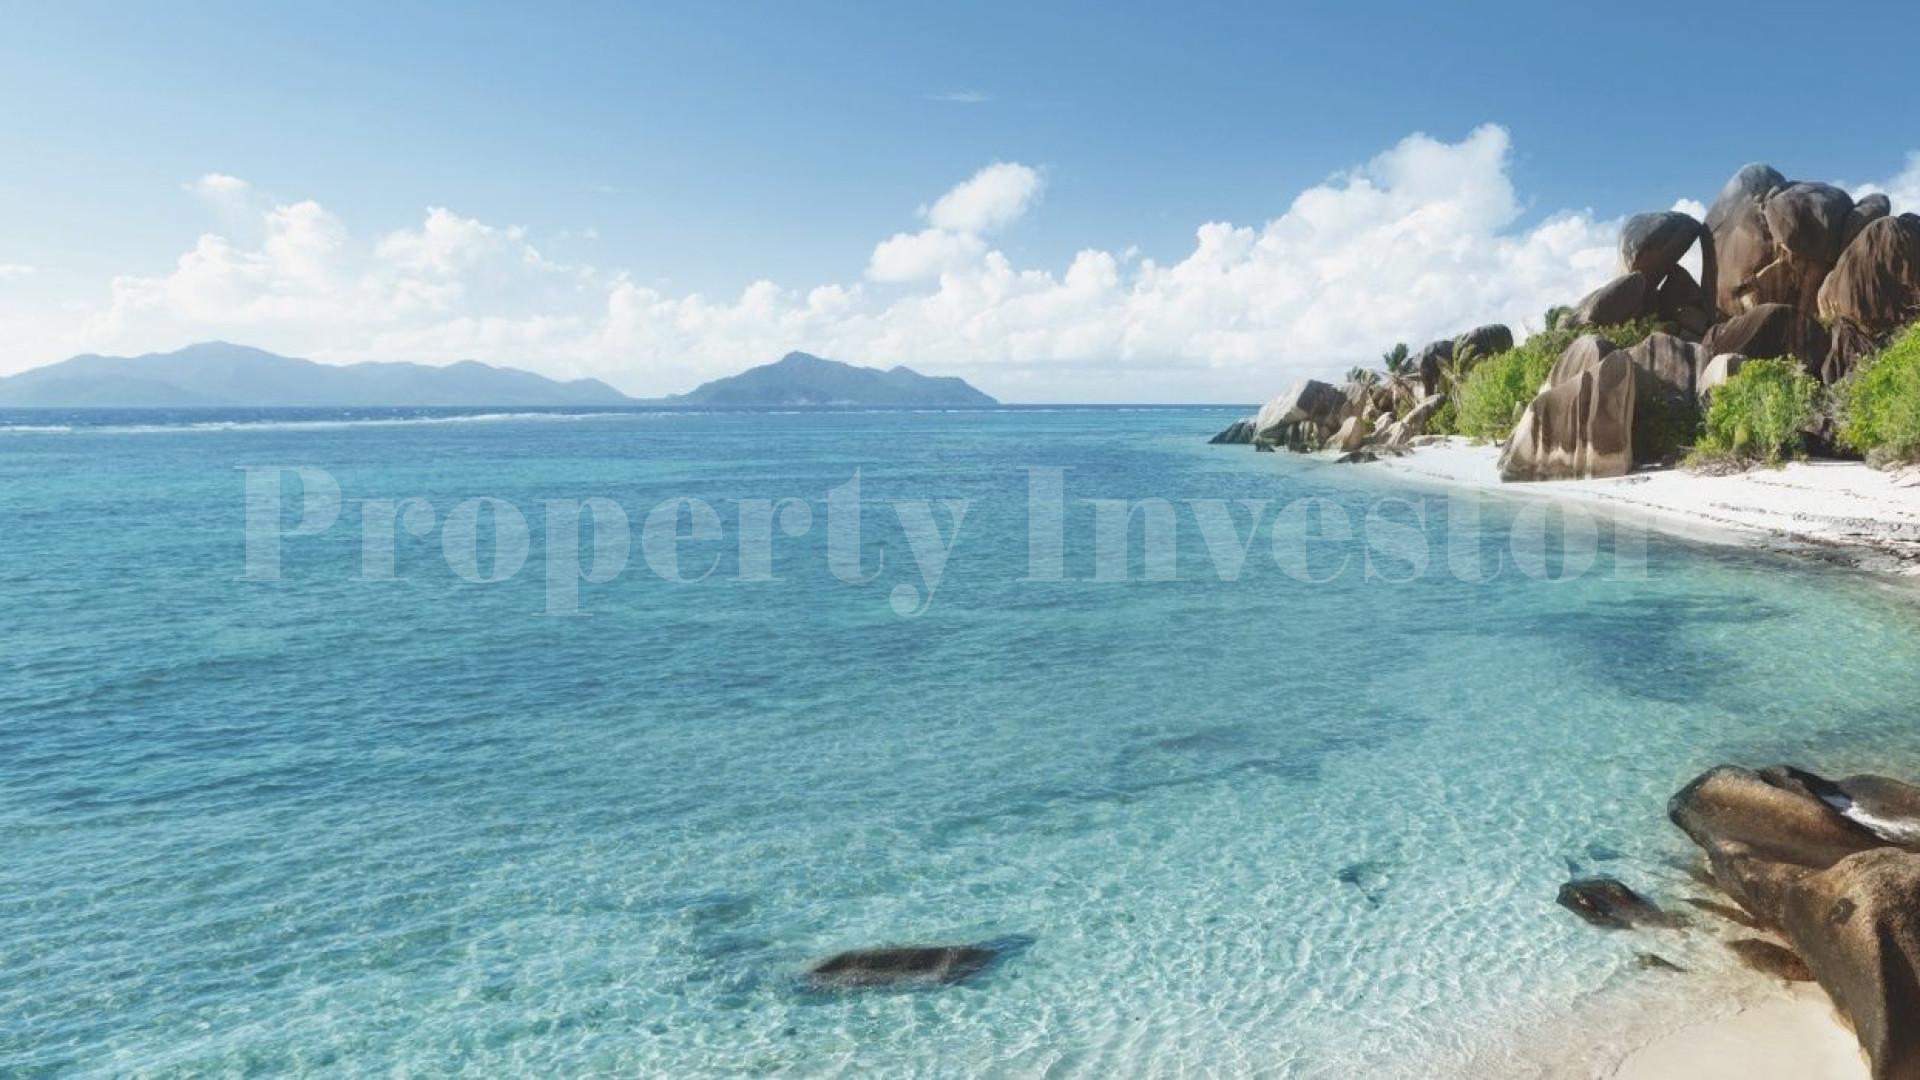 Expansive 2.7 Hectares of Beachfront Land with Private Beach Access for Sale on Cerf Island, Seychelles